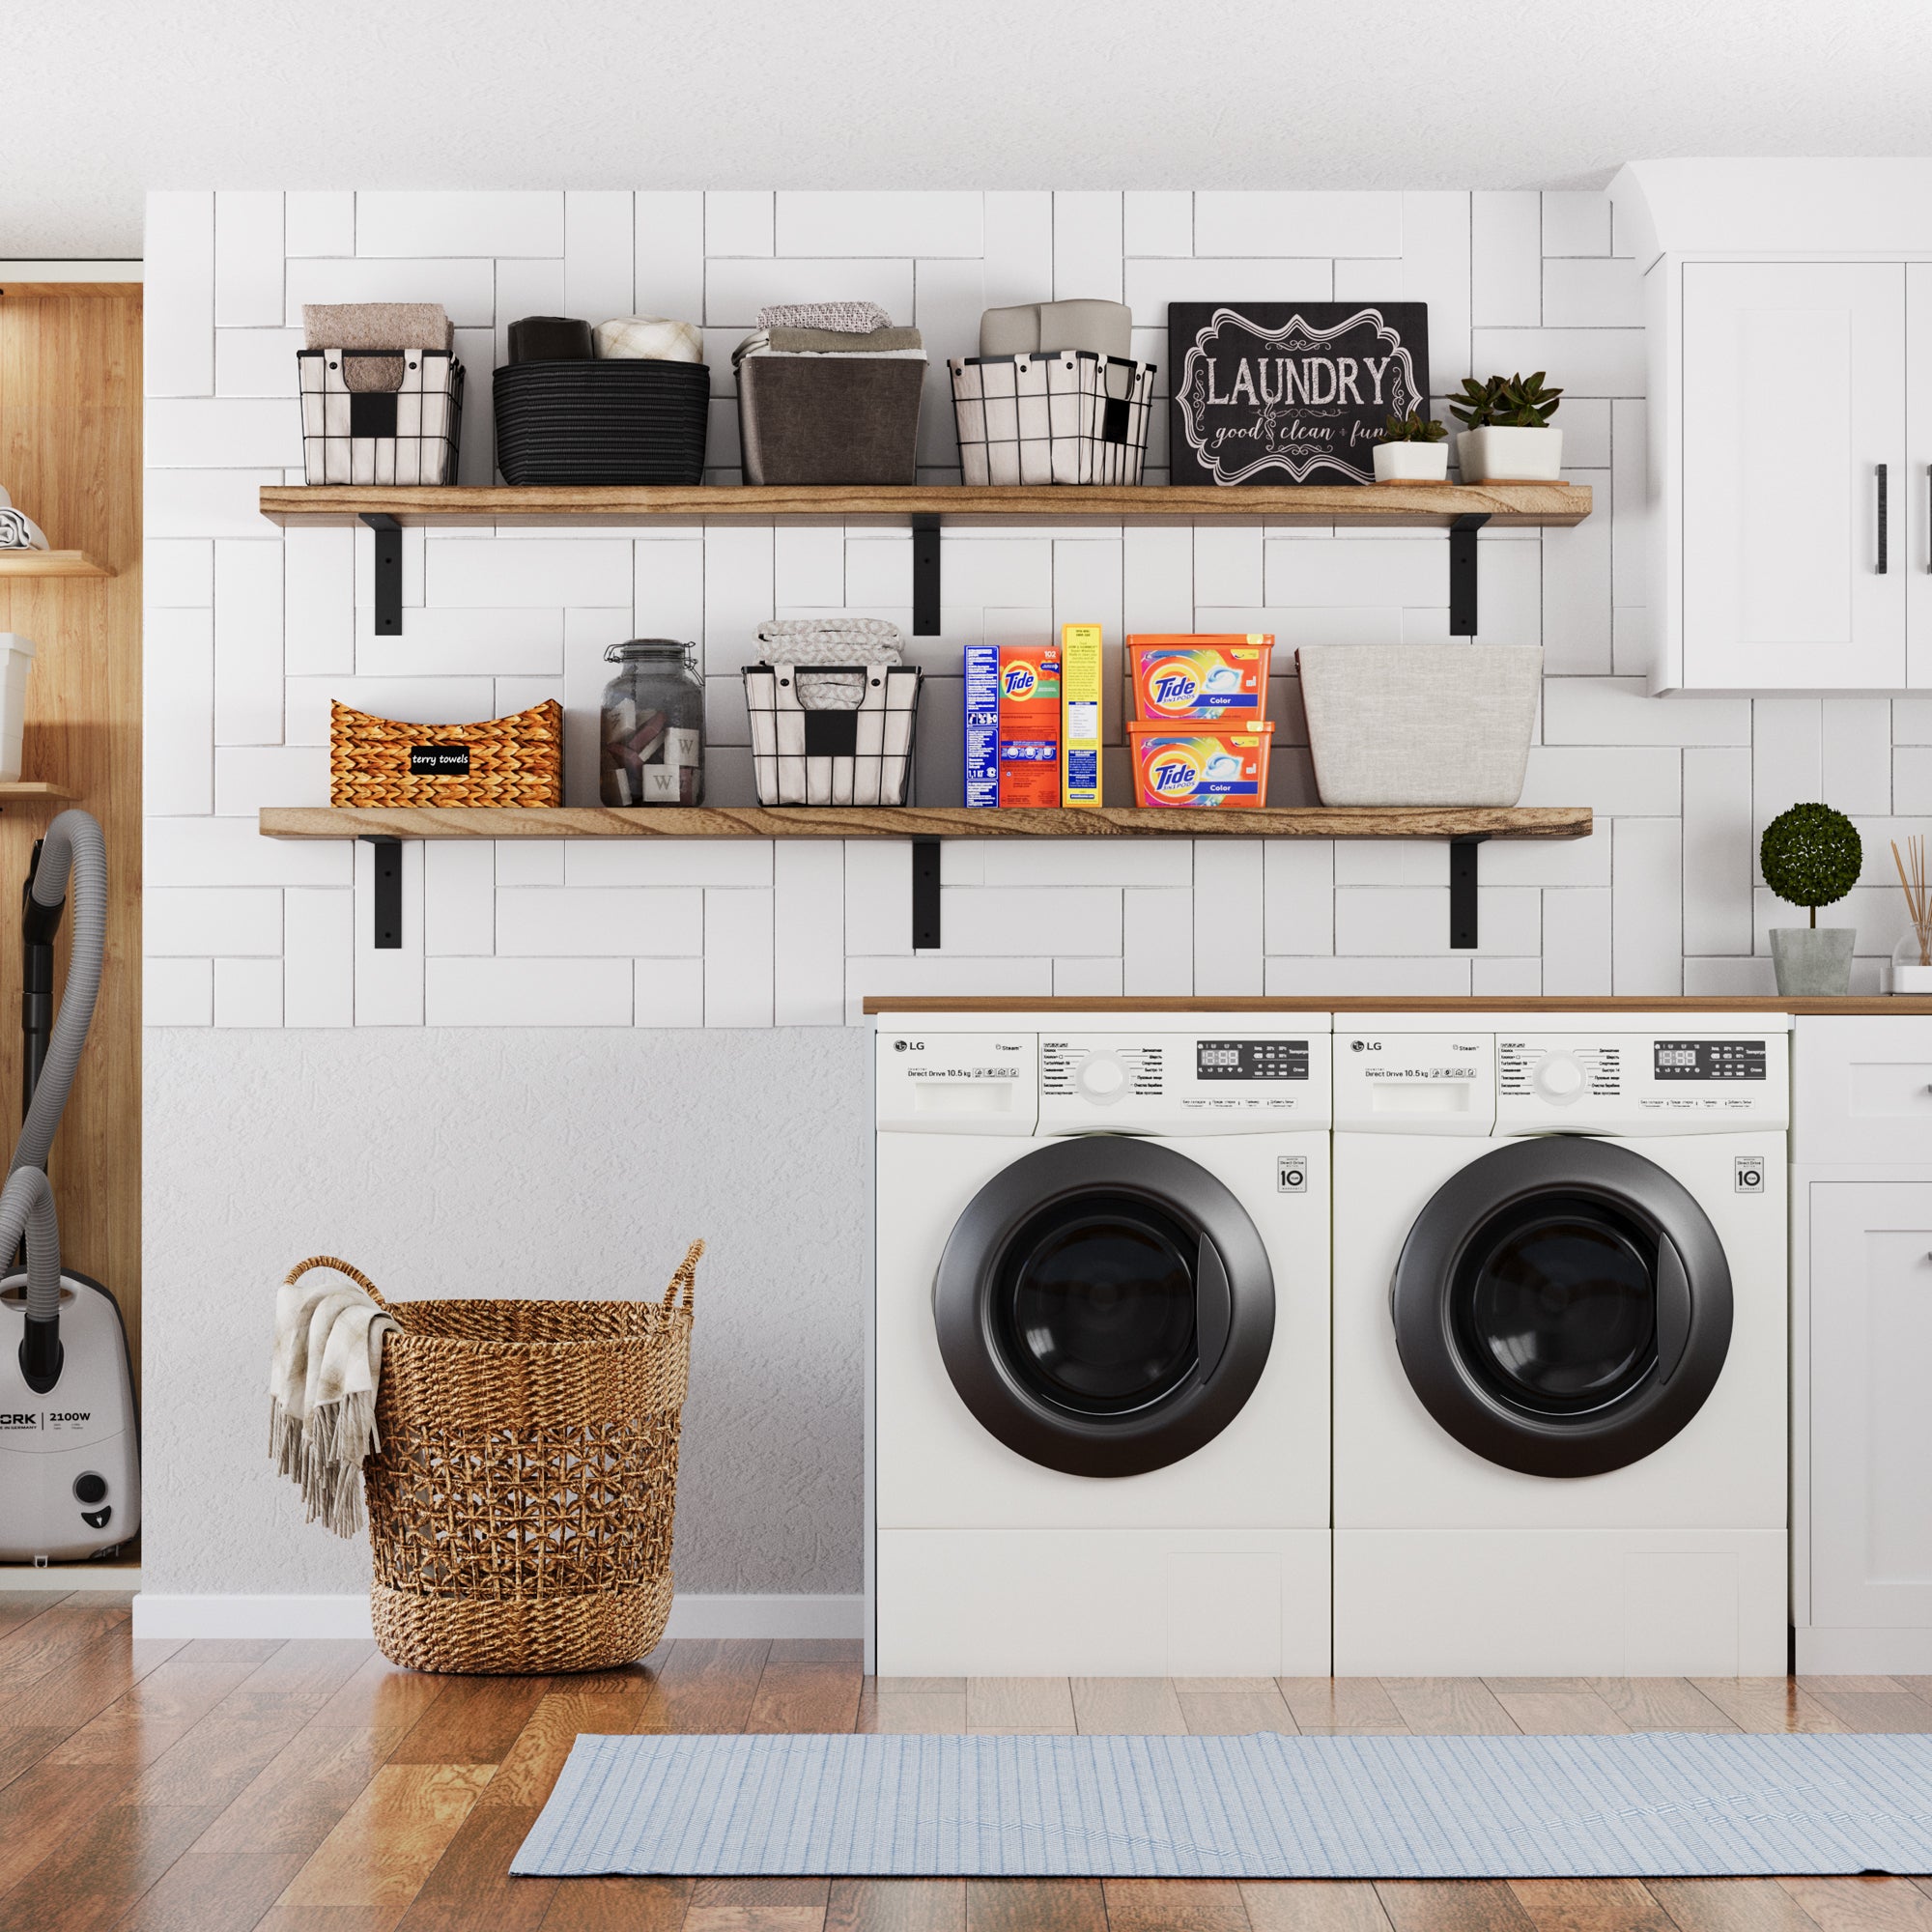 Well-organized laundry shelves with baskets, detergent, and decorative items for a tidy space.